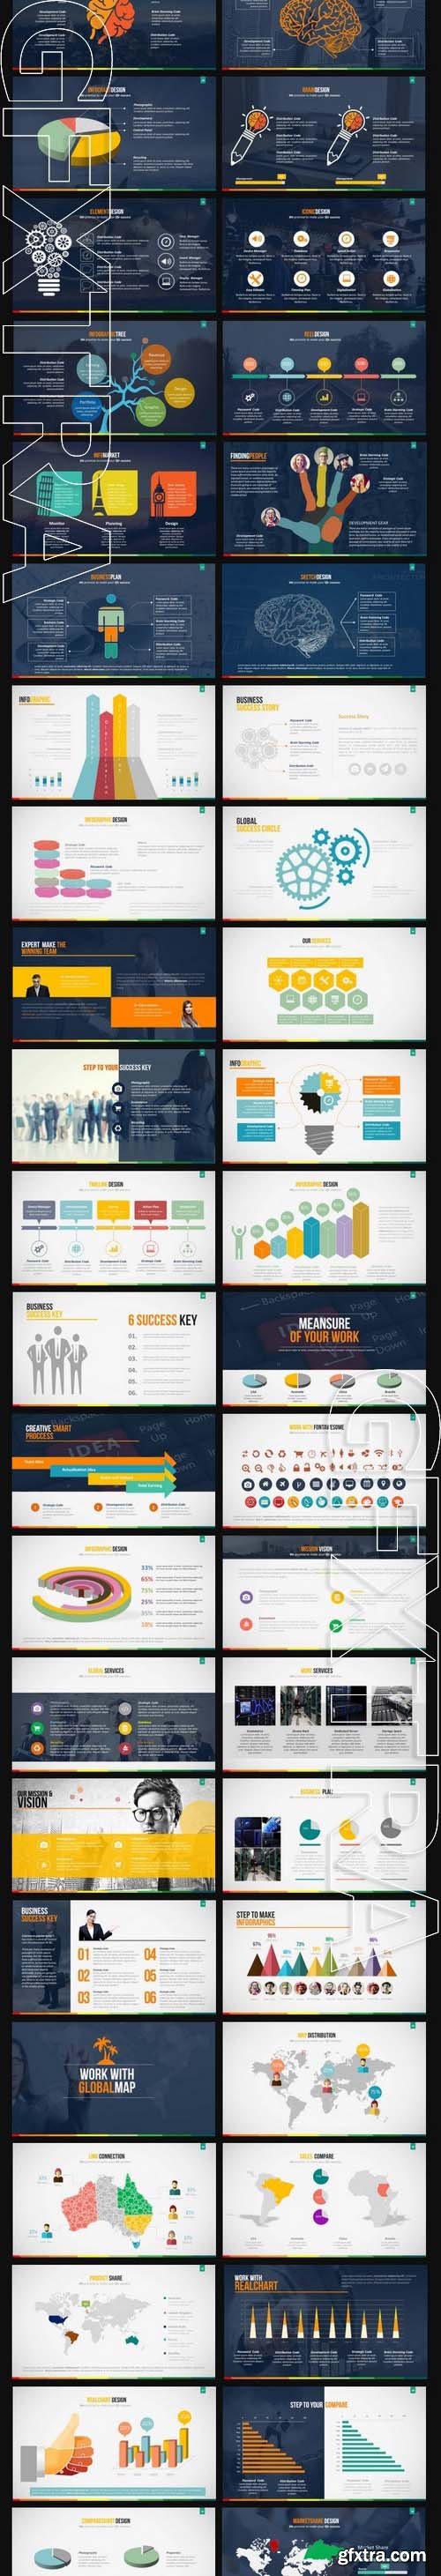 Olla PowerPoint Presentation Template - GraphicRiver 9171803